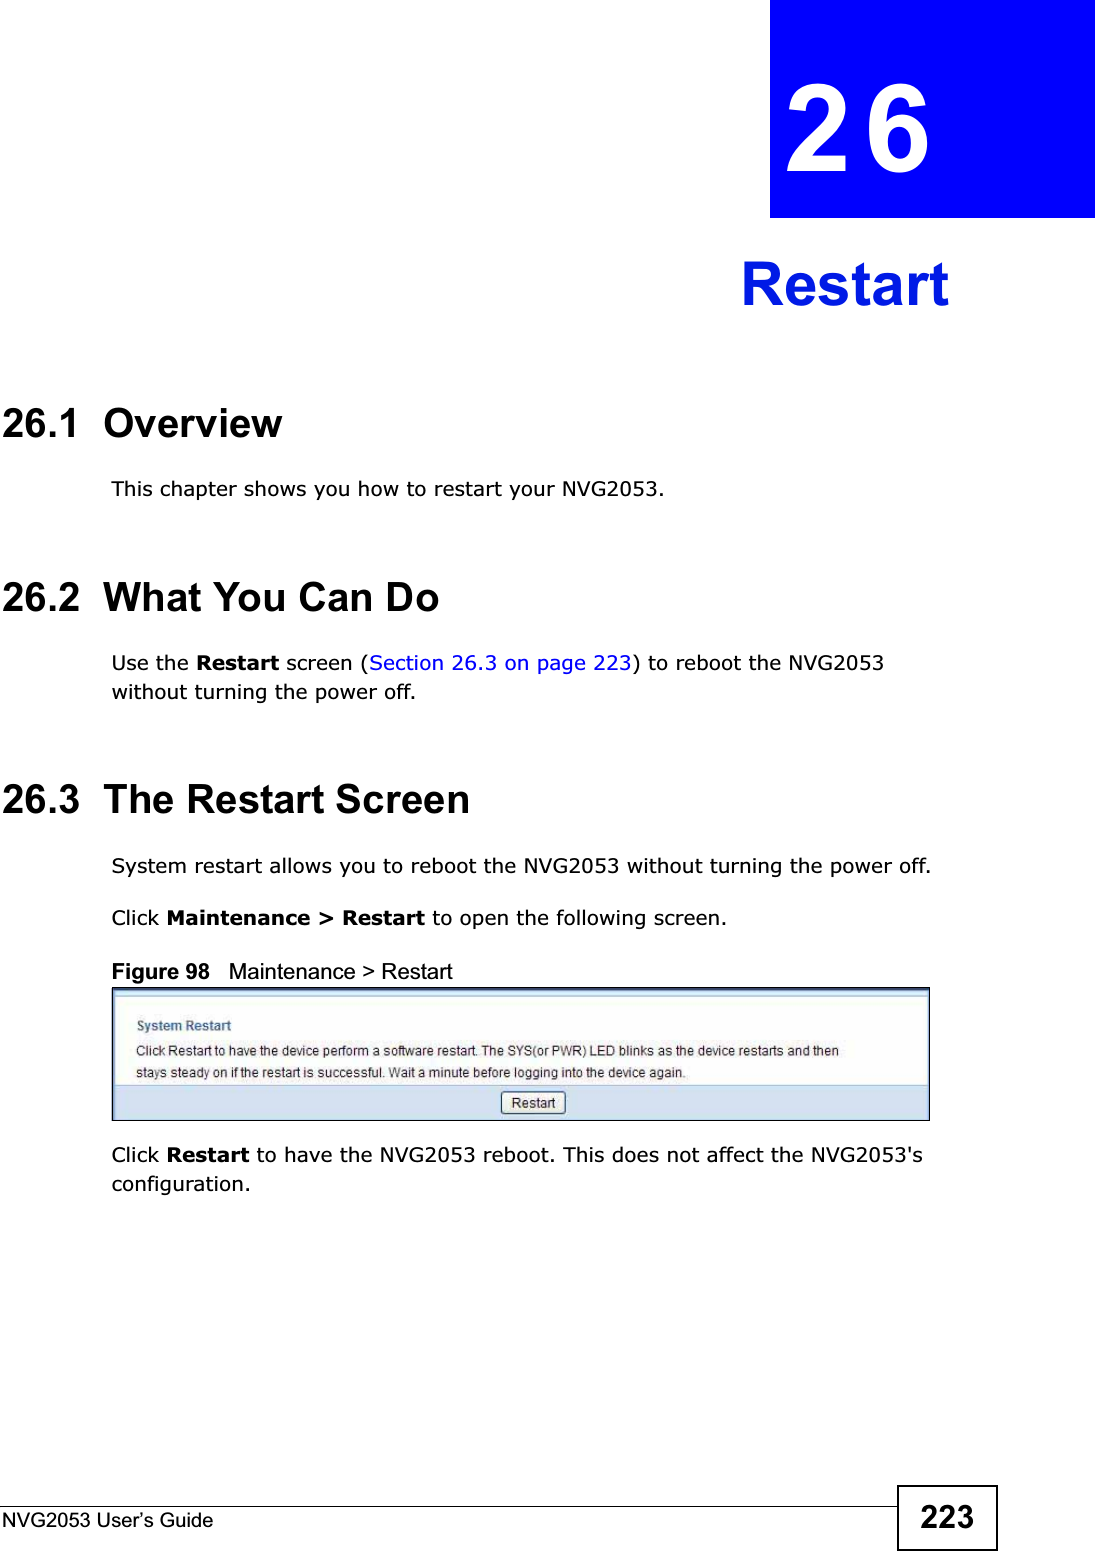 NVG2053 User’s Guide 223CHAPTER 26Restart26.1  OverviewThis chapter shows you how to restart your NVG2053.26.2  What You Can DoUse the Restart screen (Section 26.3 on page 223) to reboot the NVG2053 without turning the power off.26.3  The Restart ScreenSystem restart allows you to reboot the NVG2053 without turning the power off.Click Maintenance &gt; Restart to open the following screen.Figure 98   Maintenance &gt; RestartClick Restart to have the NVG2053 reboot. This does not affect the NVG2053&apos;s configuration.